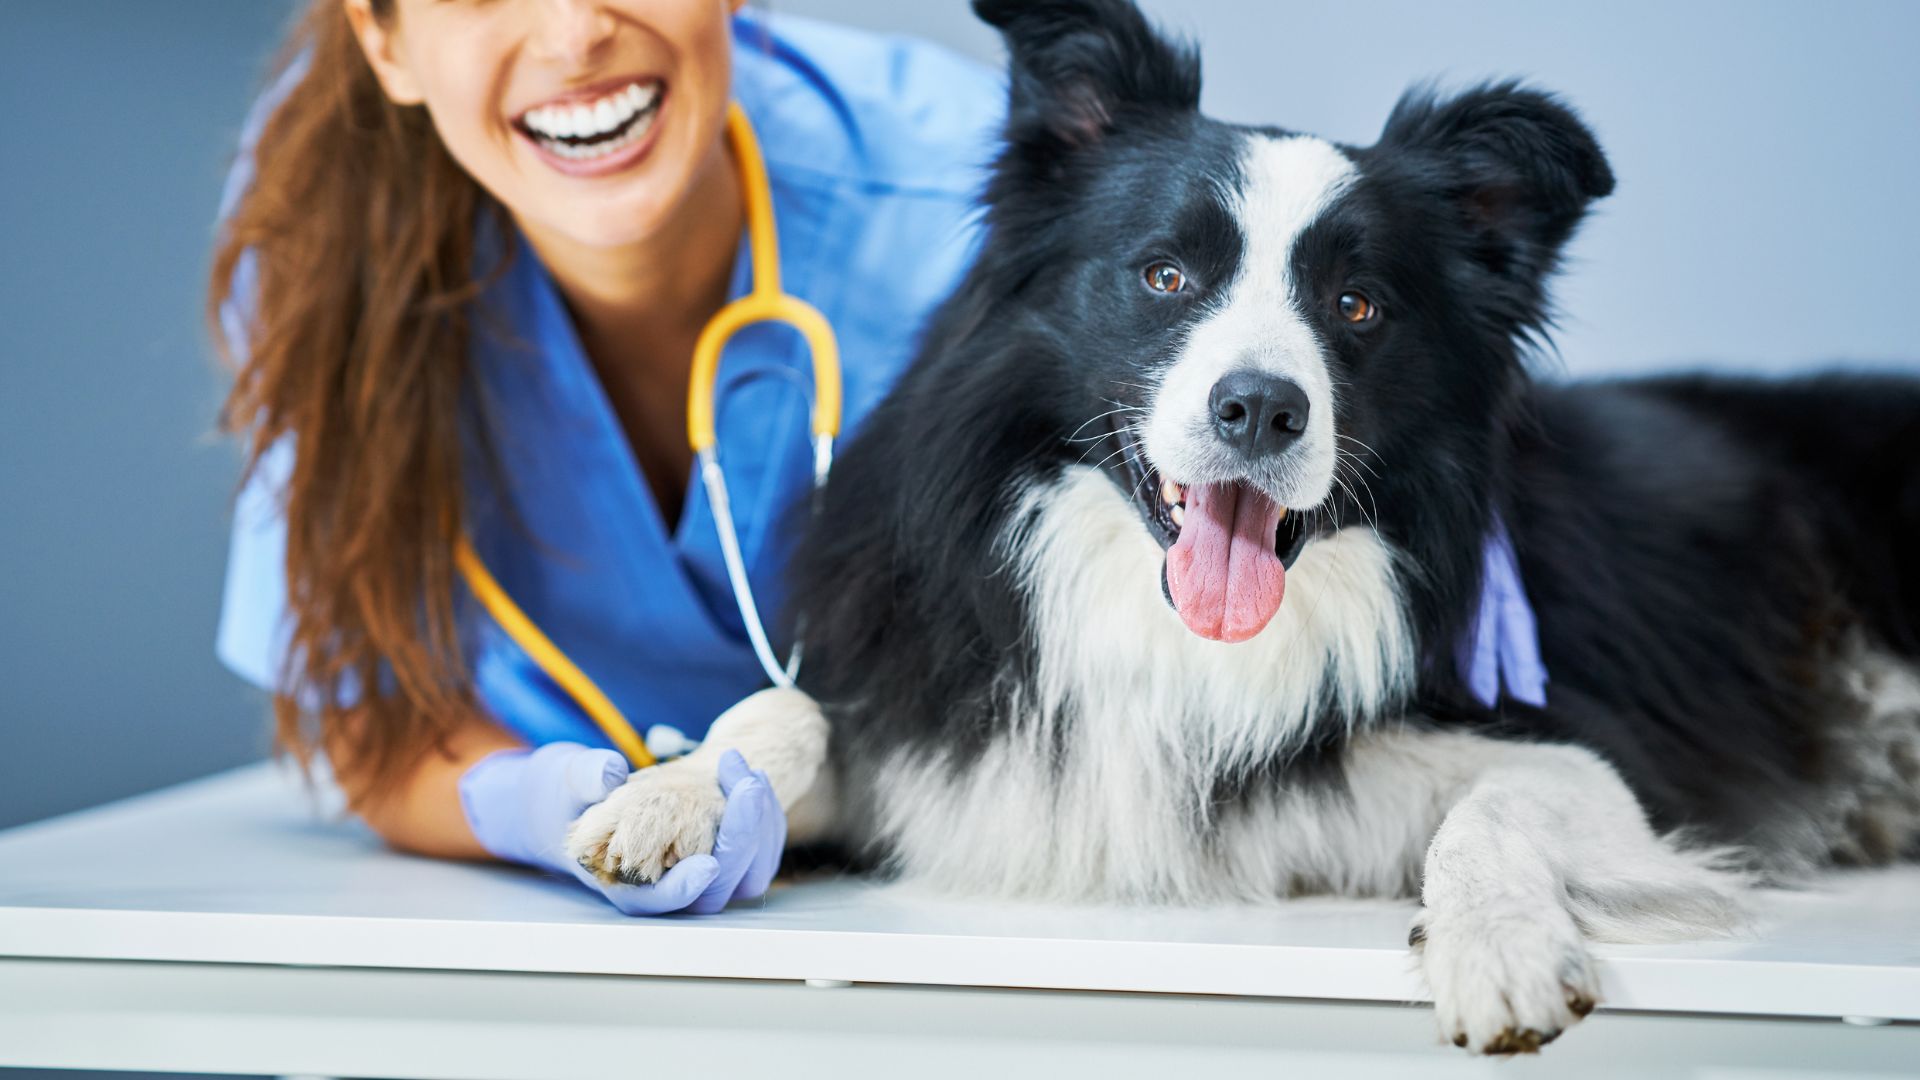 a person with a stethoscope and a dog